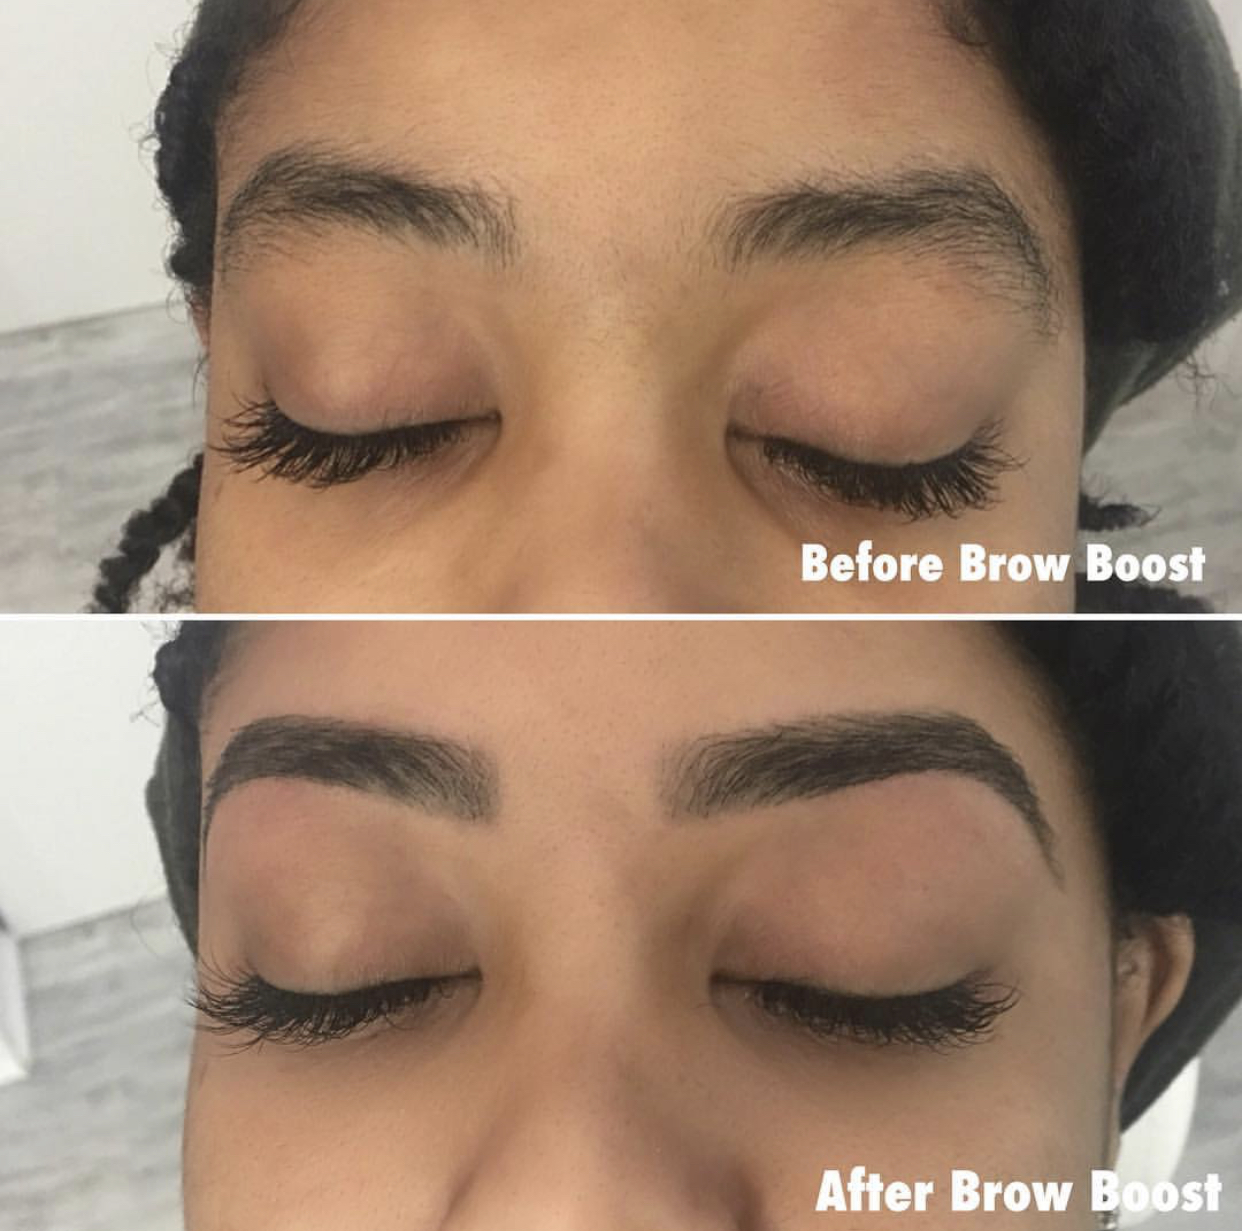 Brow Boost pic.png